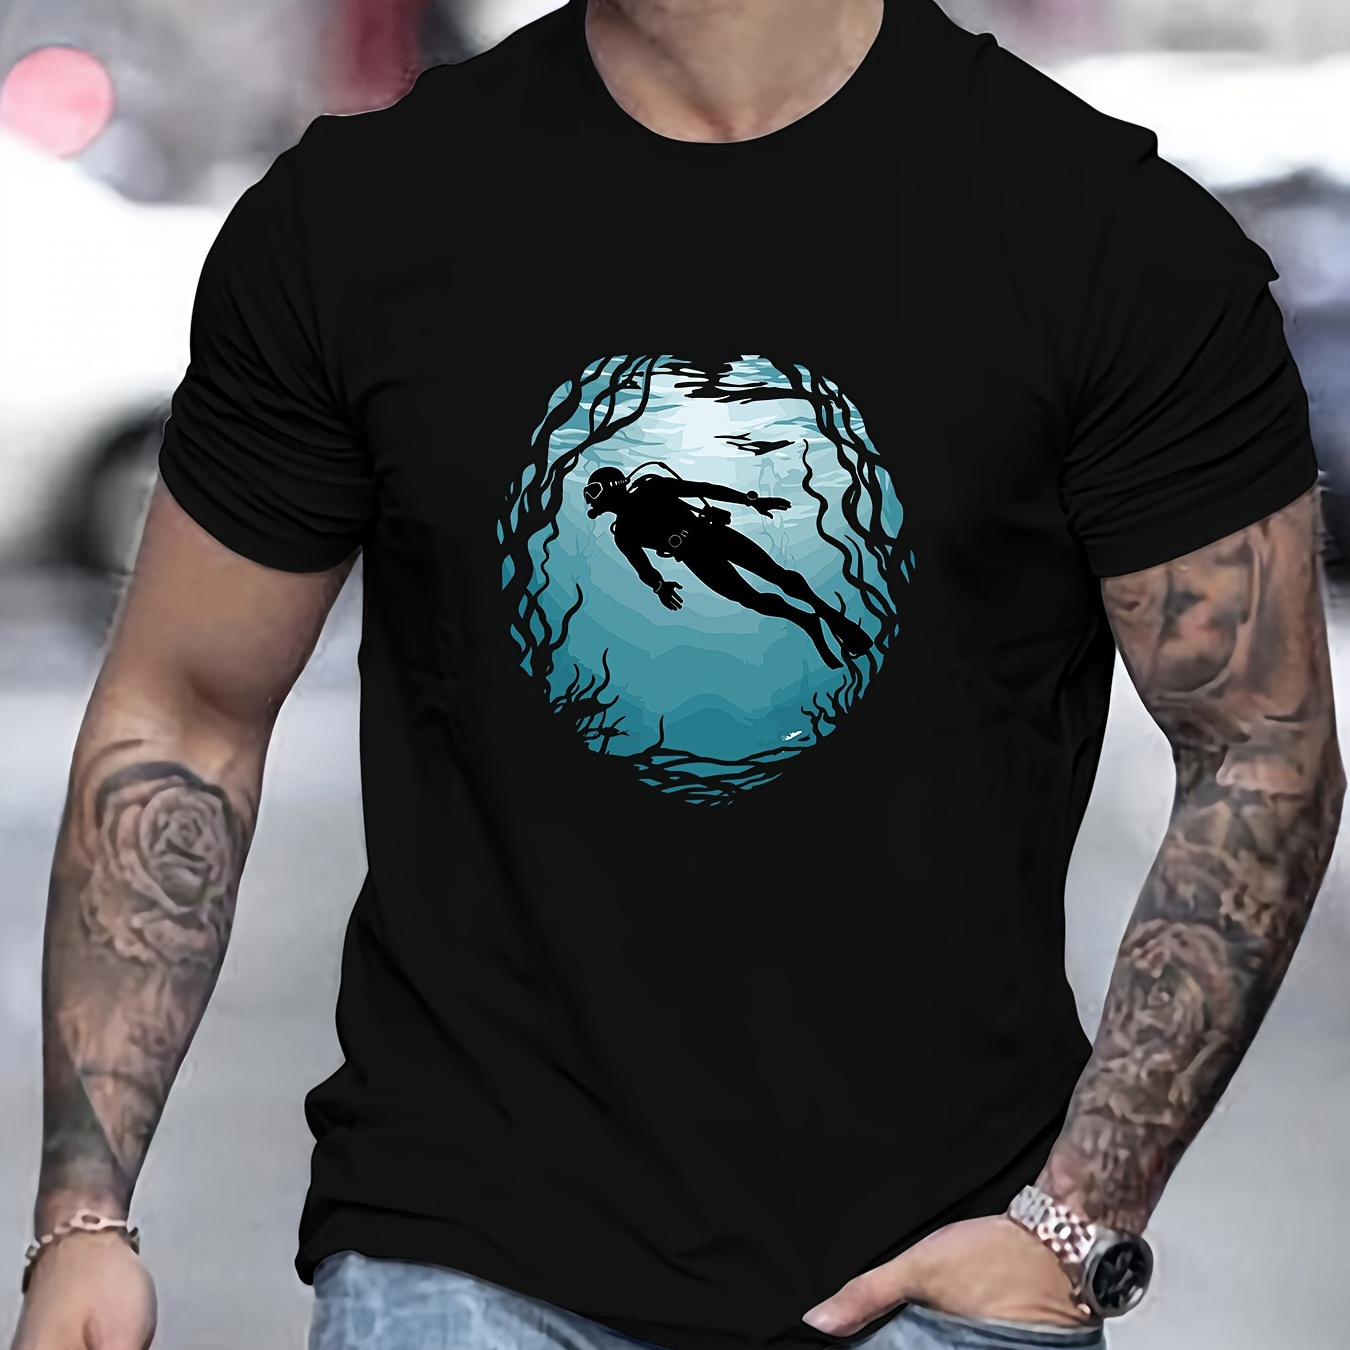 

Diver Print, Men's Round Crew Neck Short Sleeve, Simple Style Tee Fashion Regular Fit T-shirt, Casual Comfy Top For Spring Summer Holiday Leisure Vacation Men's Clothing As Gift